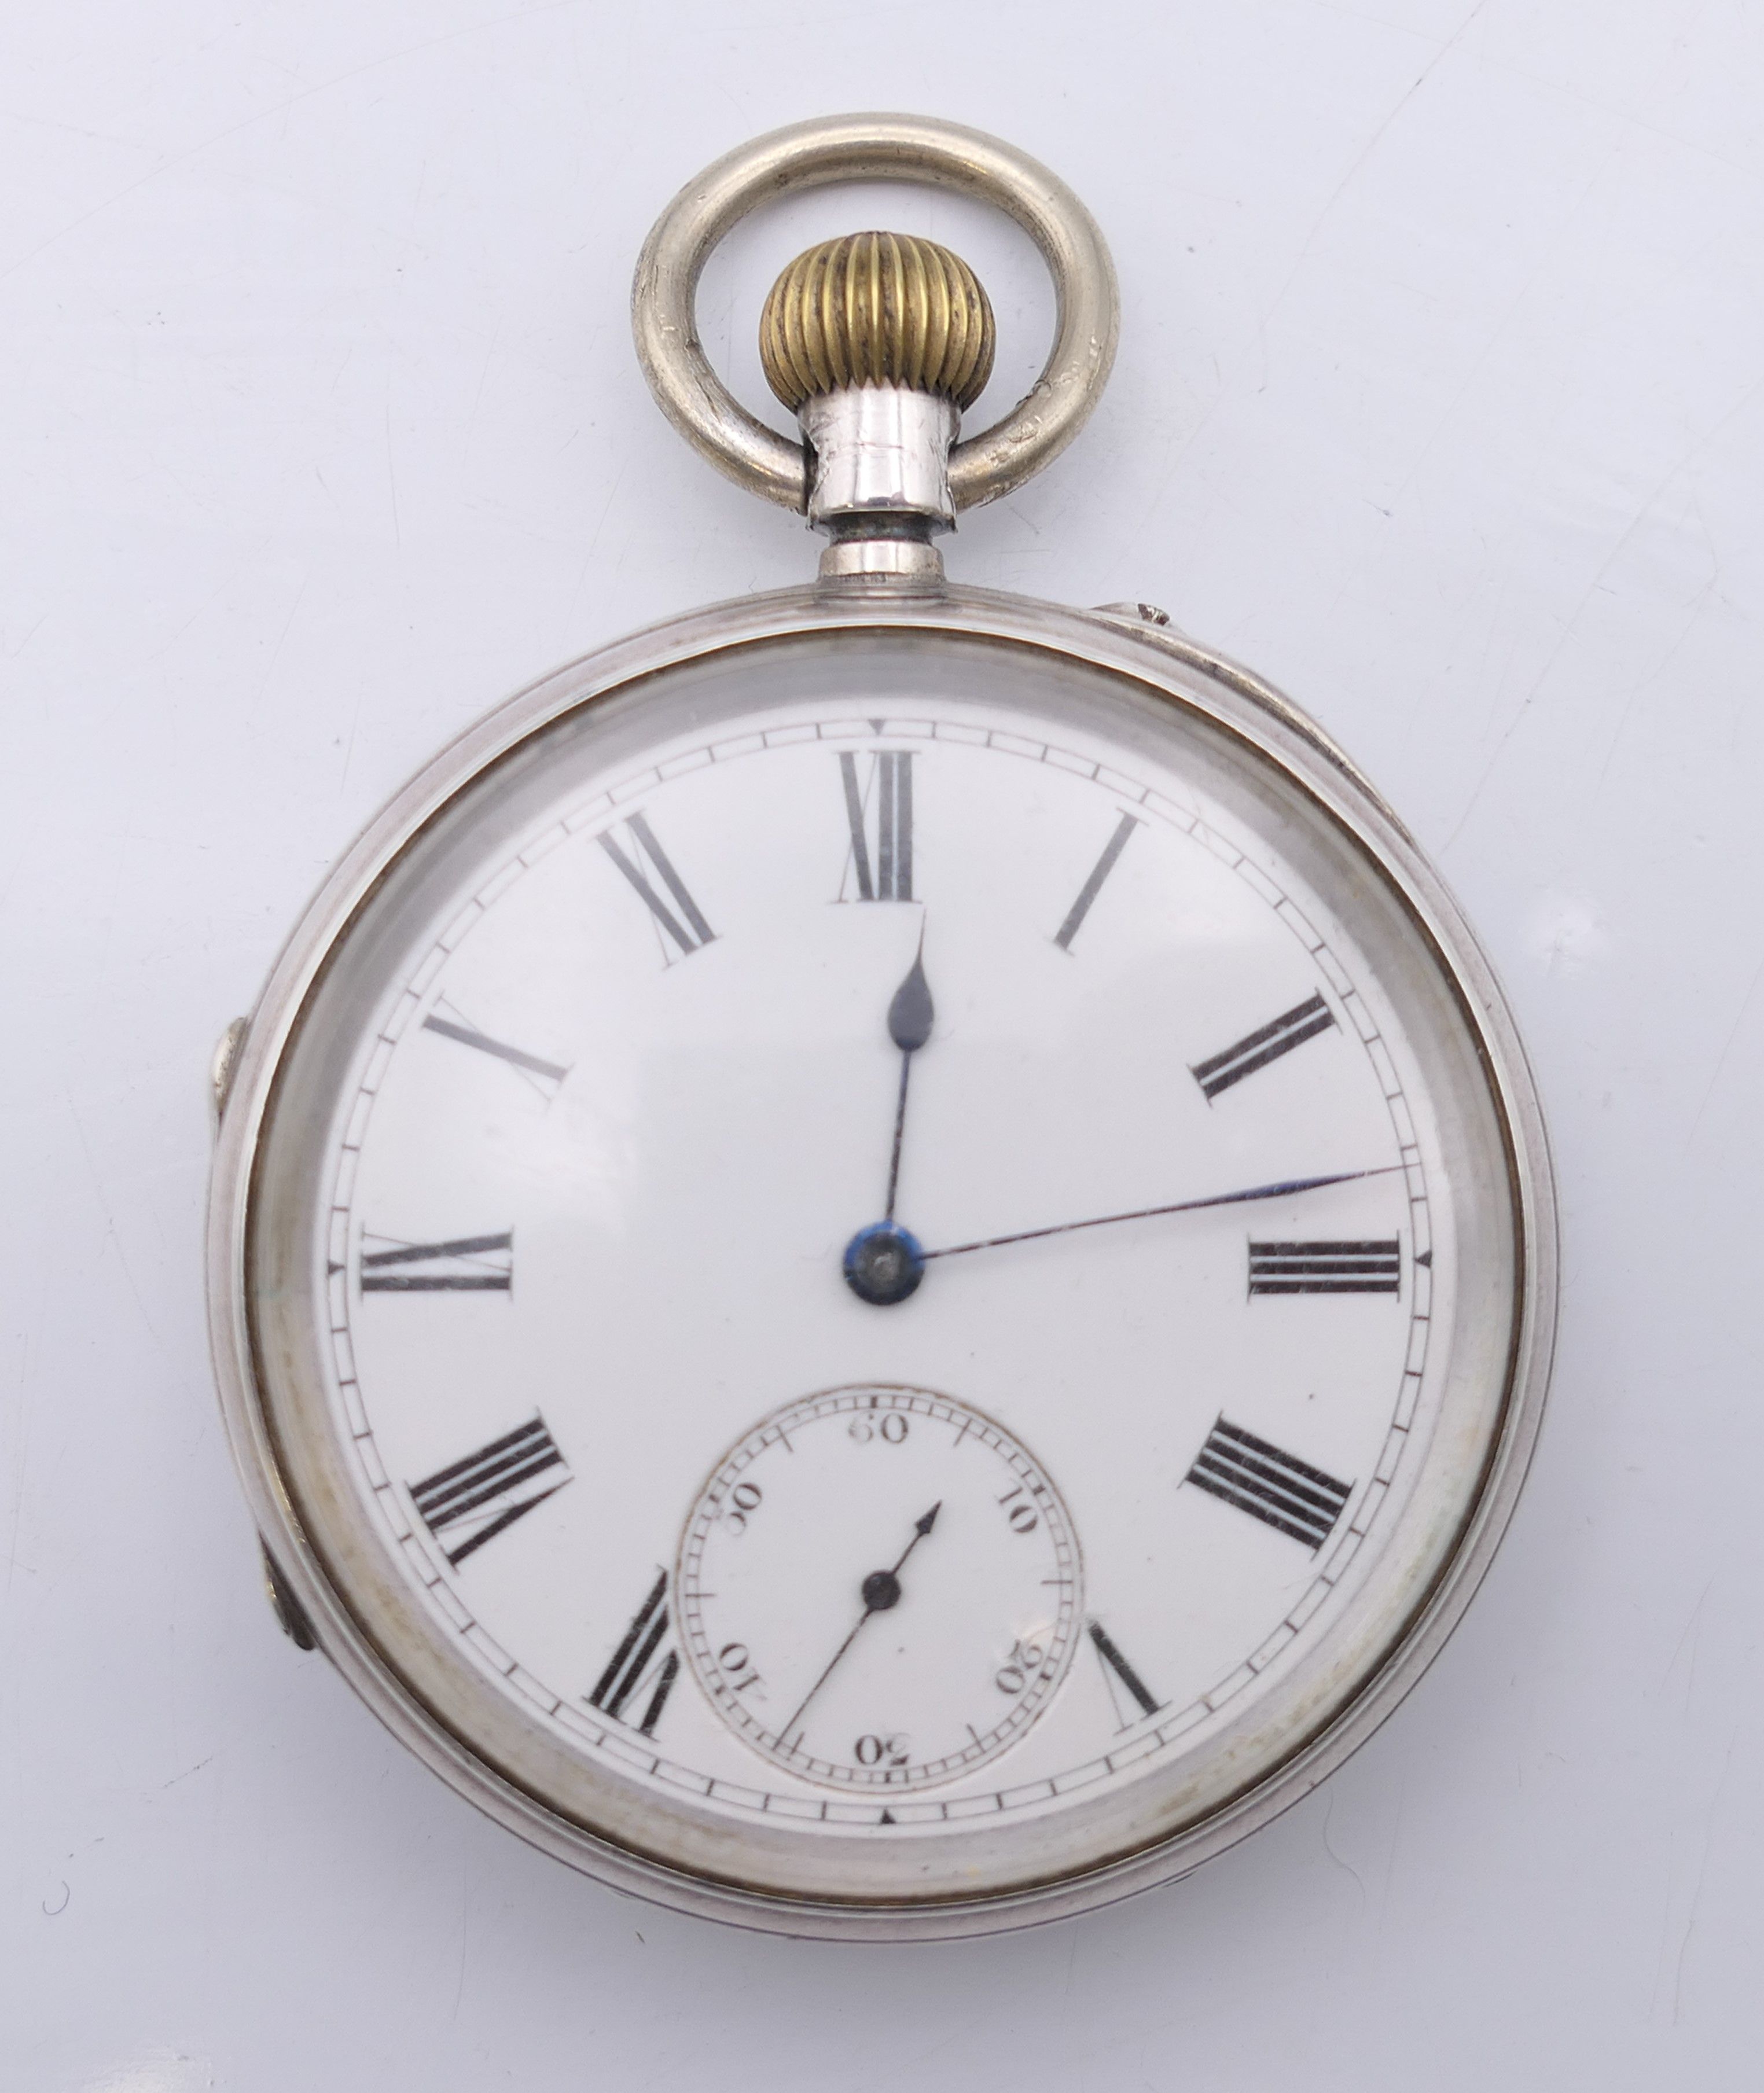 A Crouch of Chichester & Worthing silver pocket watch, hallmarked for London 1891,